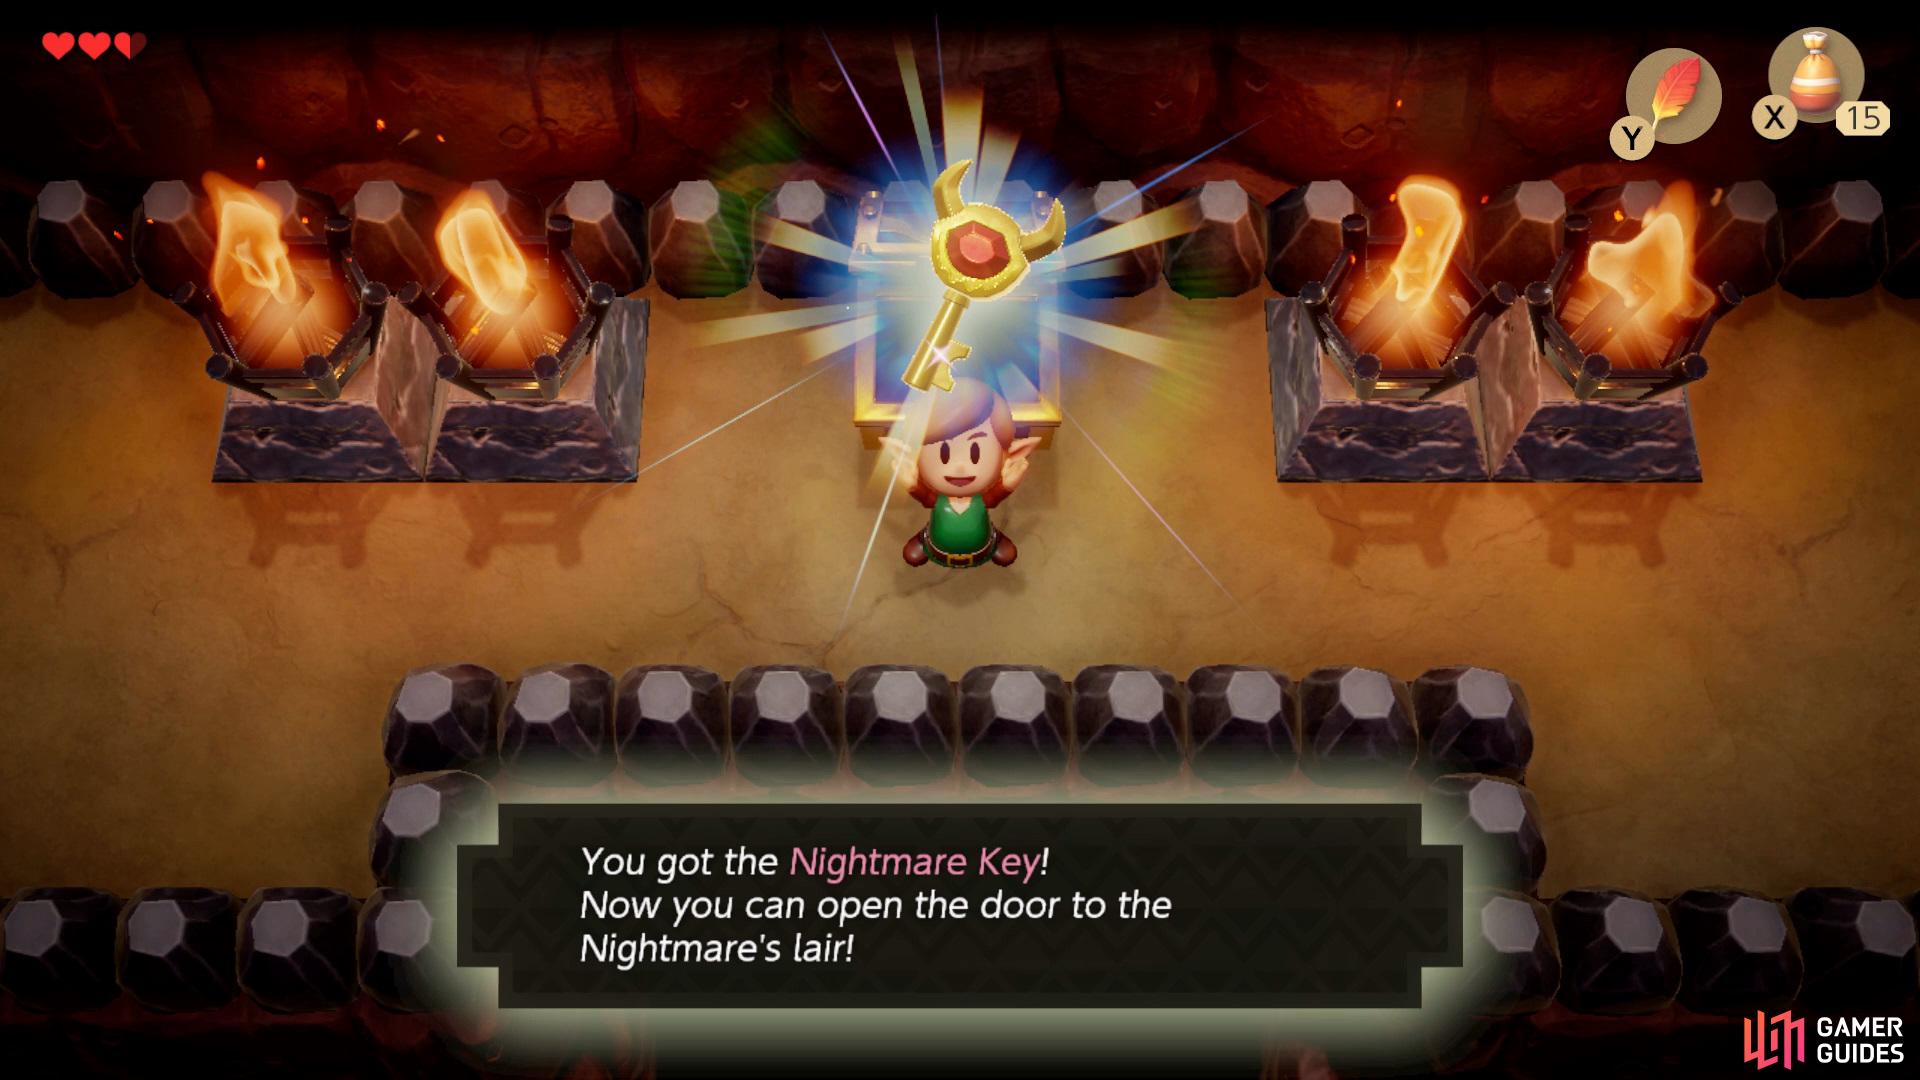 then follow the path around to obtain your Nightmare Key from the Chest.